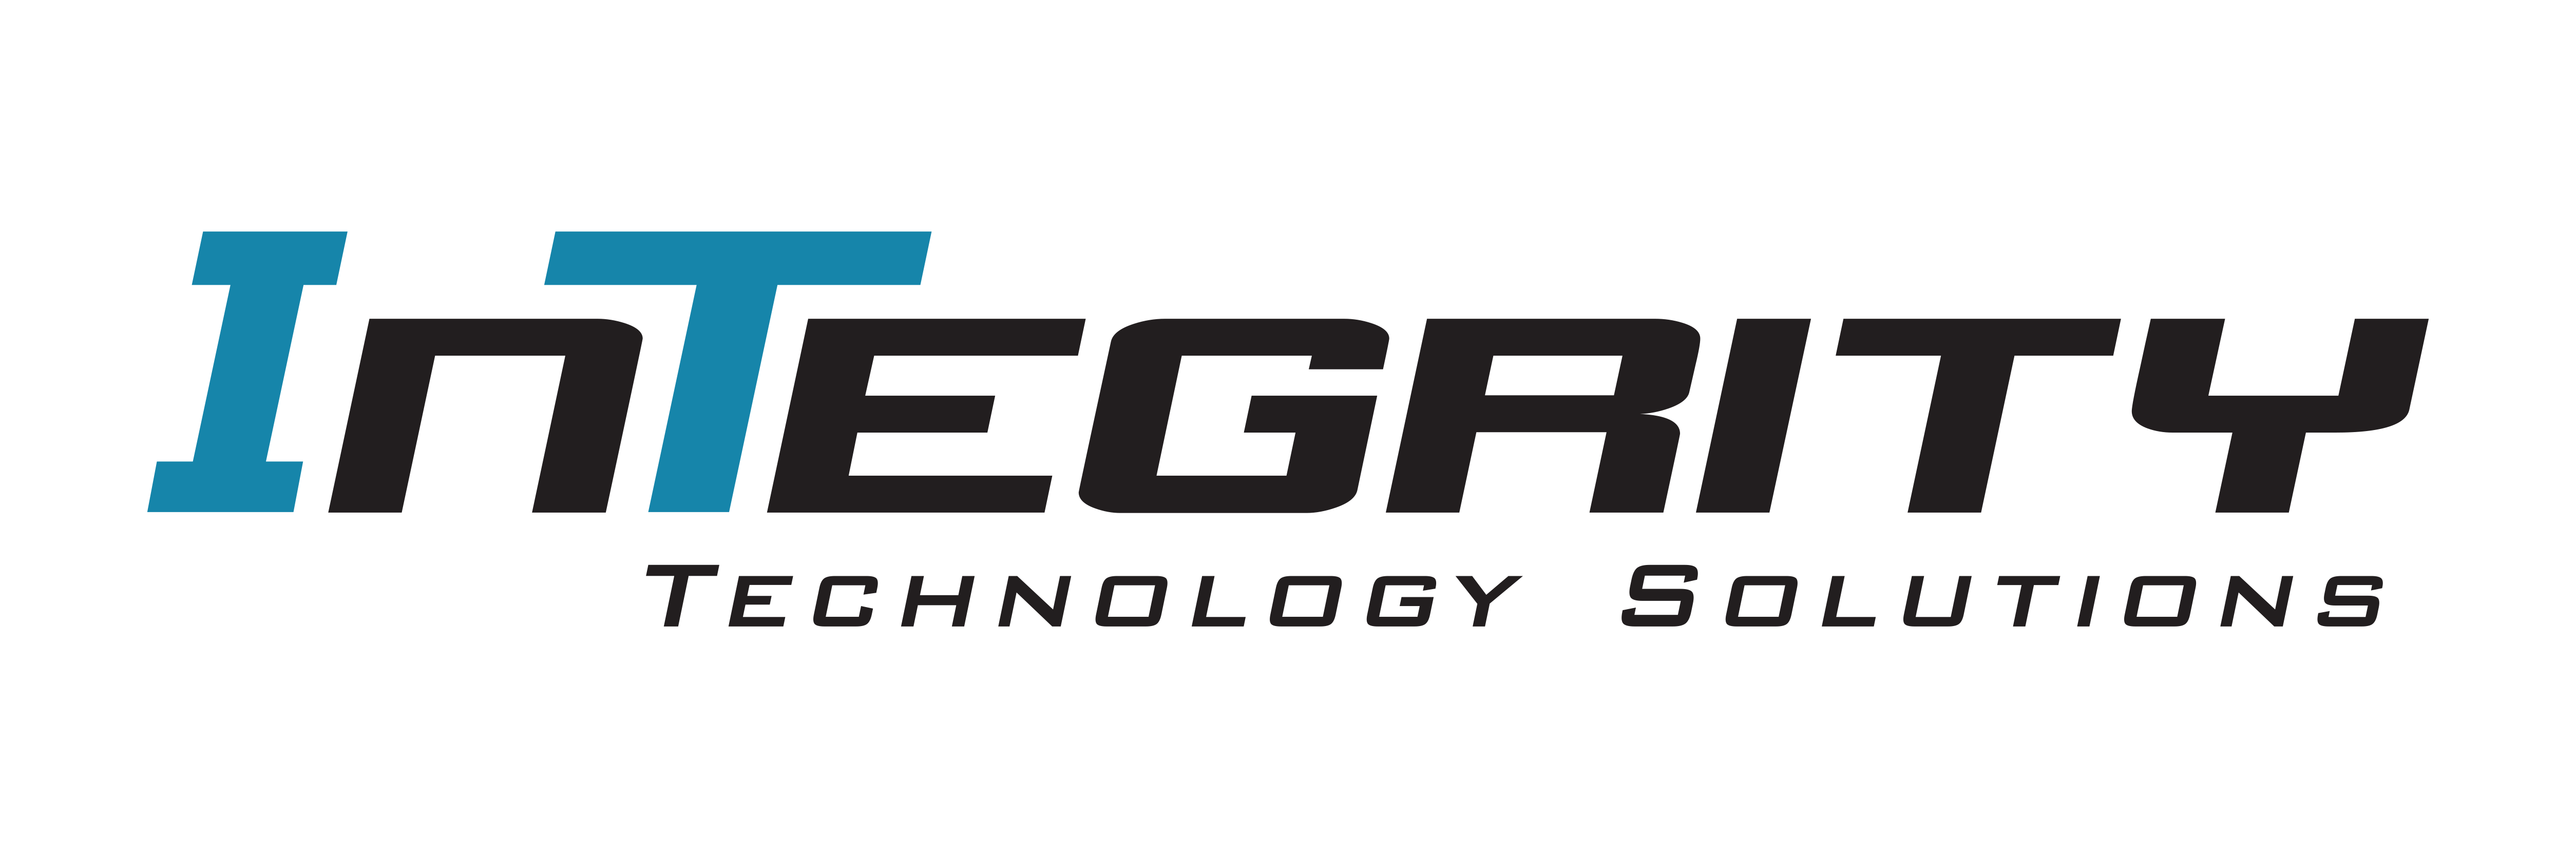 Integrity Technology Solutions Logo